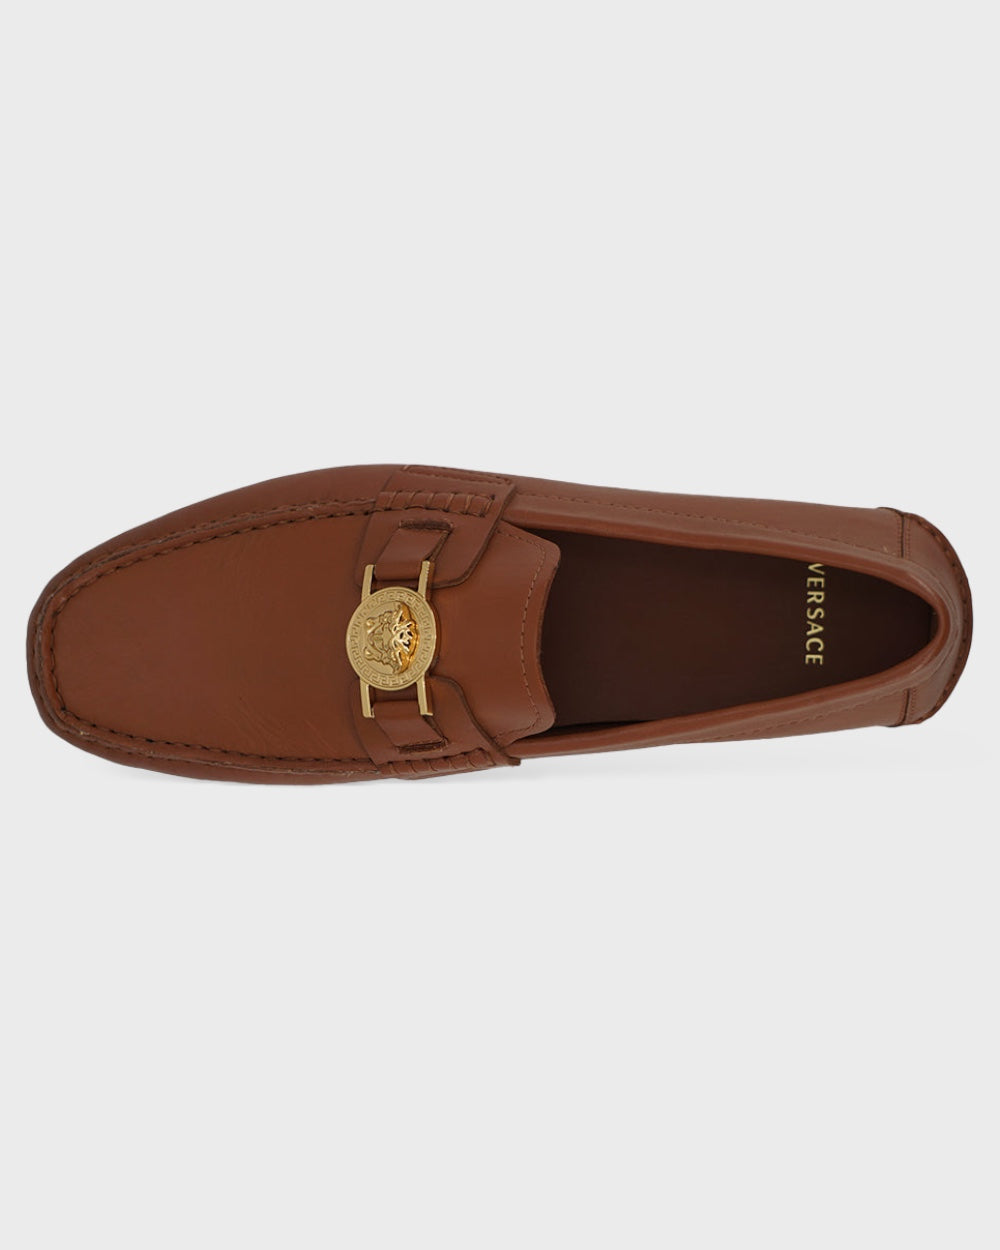 Versace Natural Brown Calf Leather Loafers Shoes